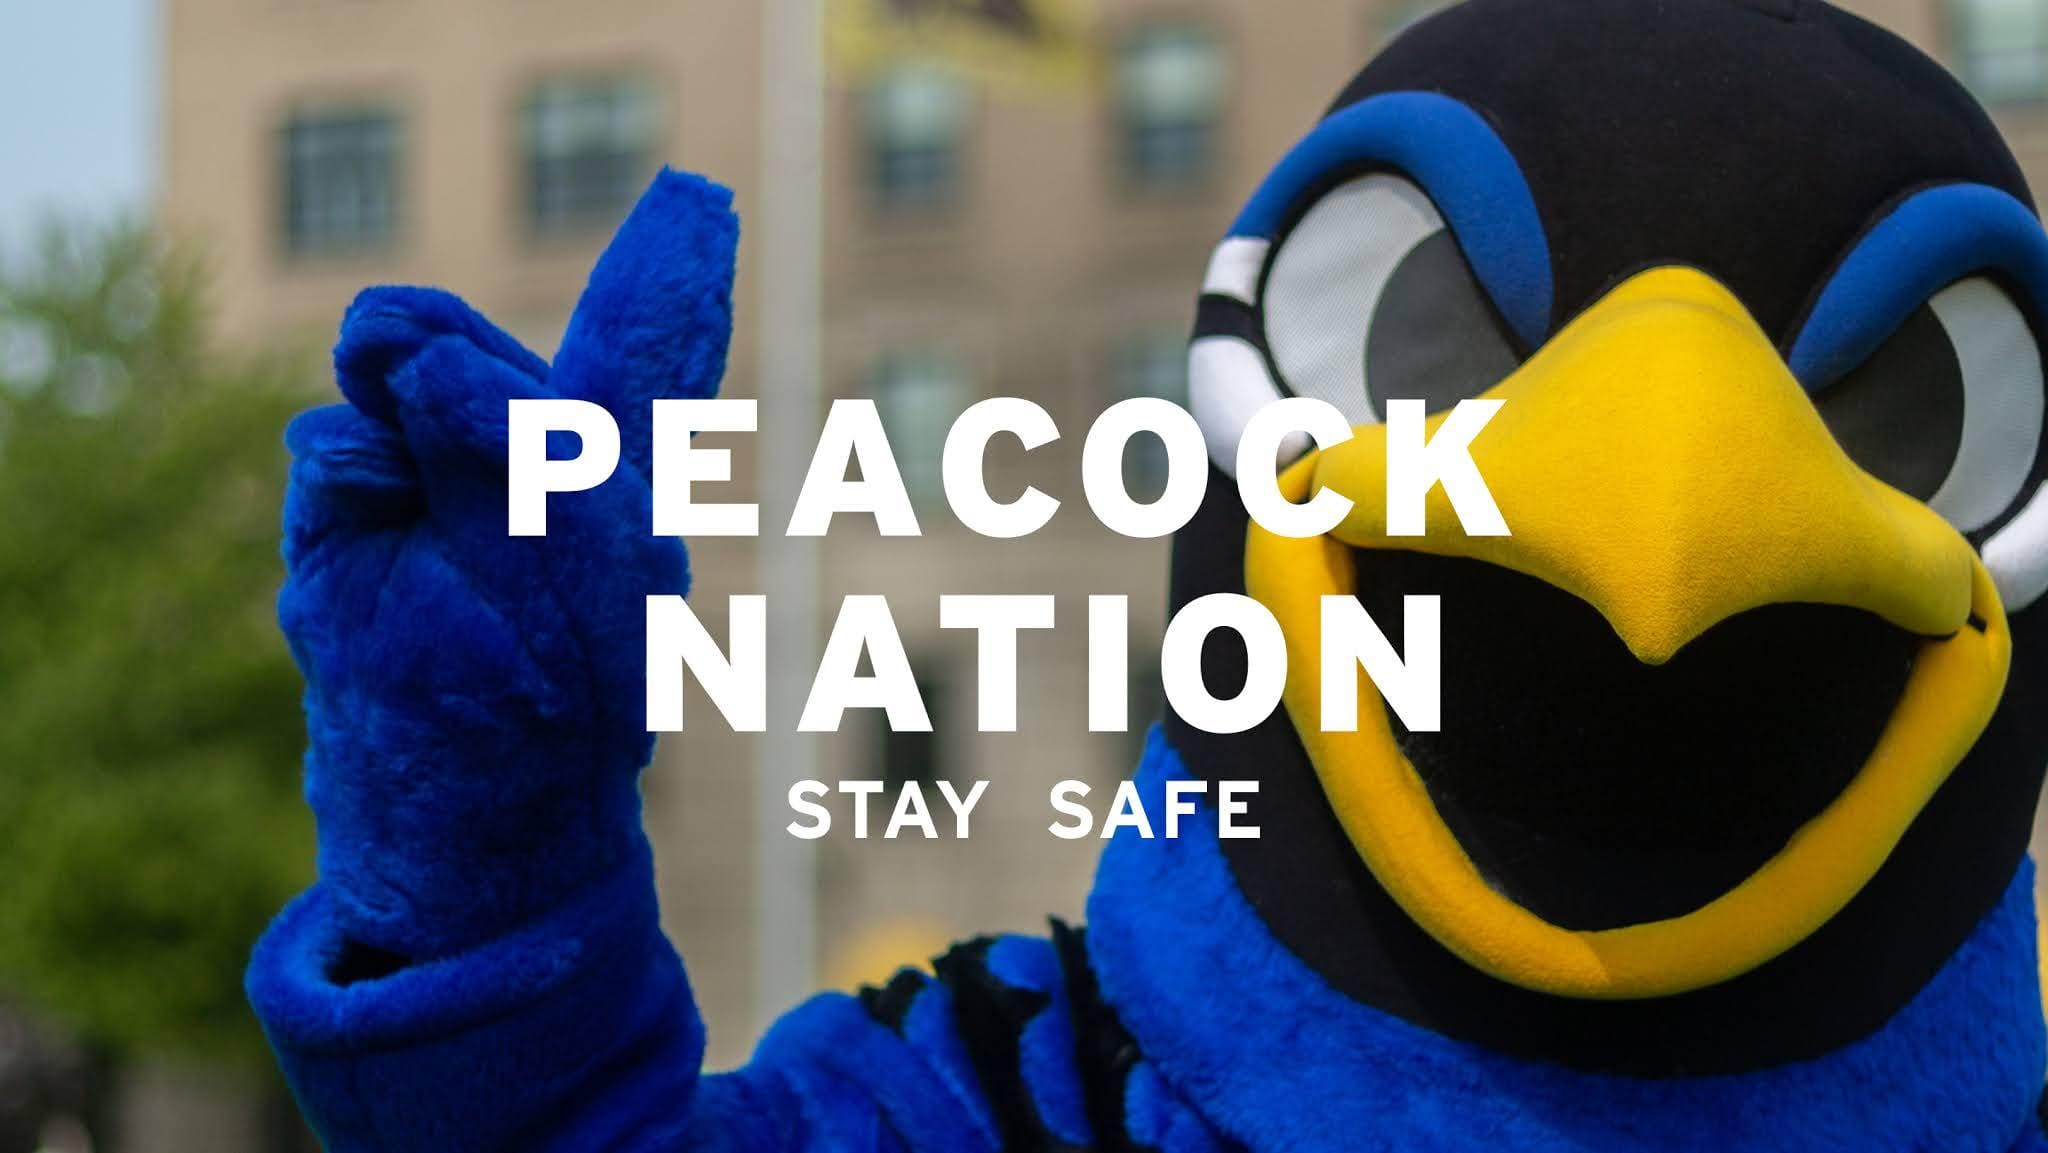 an image of the CCS mascot, watson outside on the campus with white text that says "Peacock Nation Stay Safe"